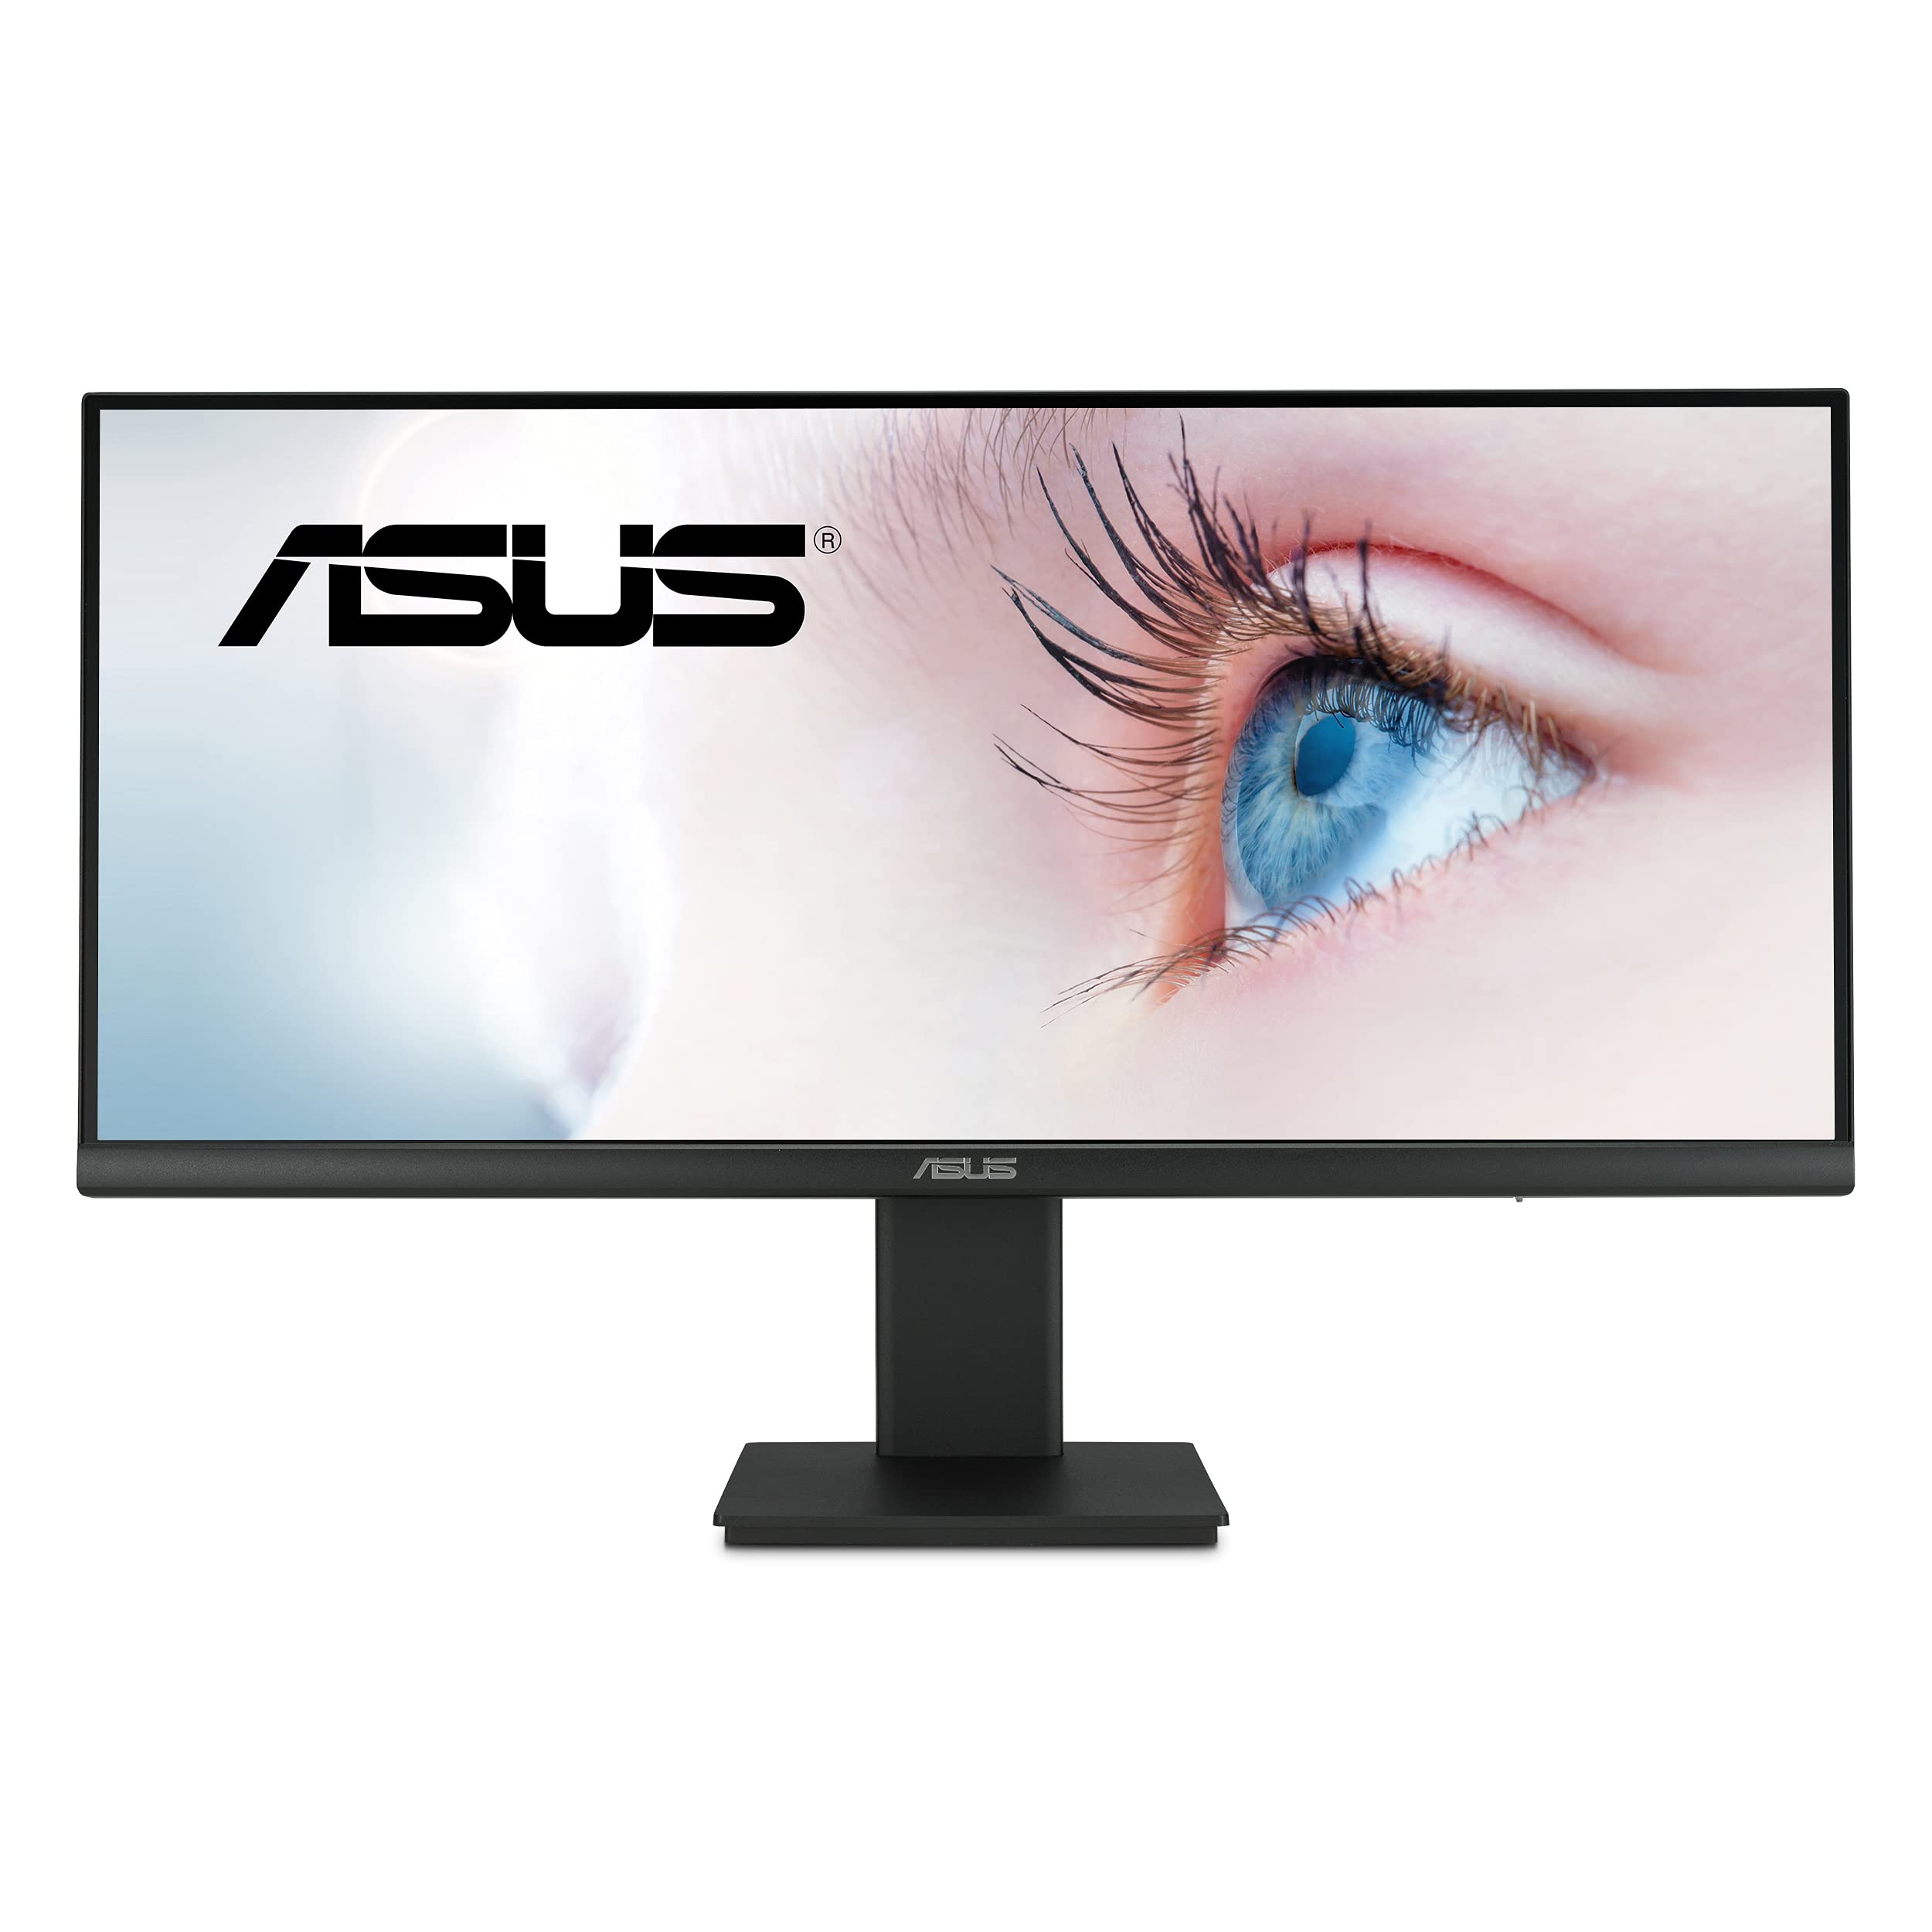  Asus 29” 1080P Ultrawide HDR Monitor (VP299CL) - 21:9 (2560 x 1080), IPS, 75Hz, 1ms, USB-C w/ 15W Power Delivery, FreeSync, Eye Care Plus, HDR-10, VESA Mountable, HDMI, DisplayPort, Height Adjustable...